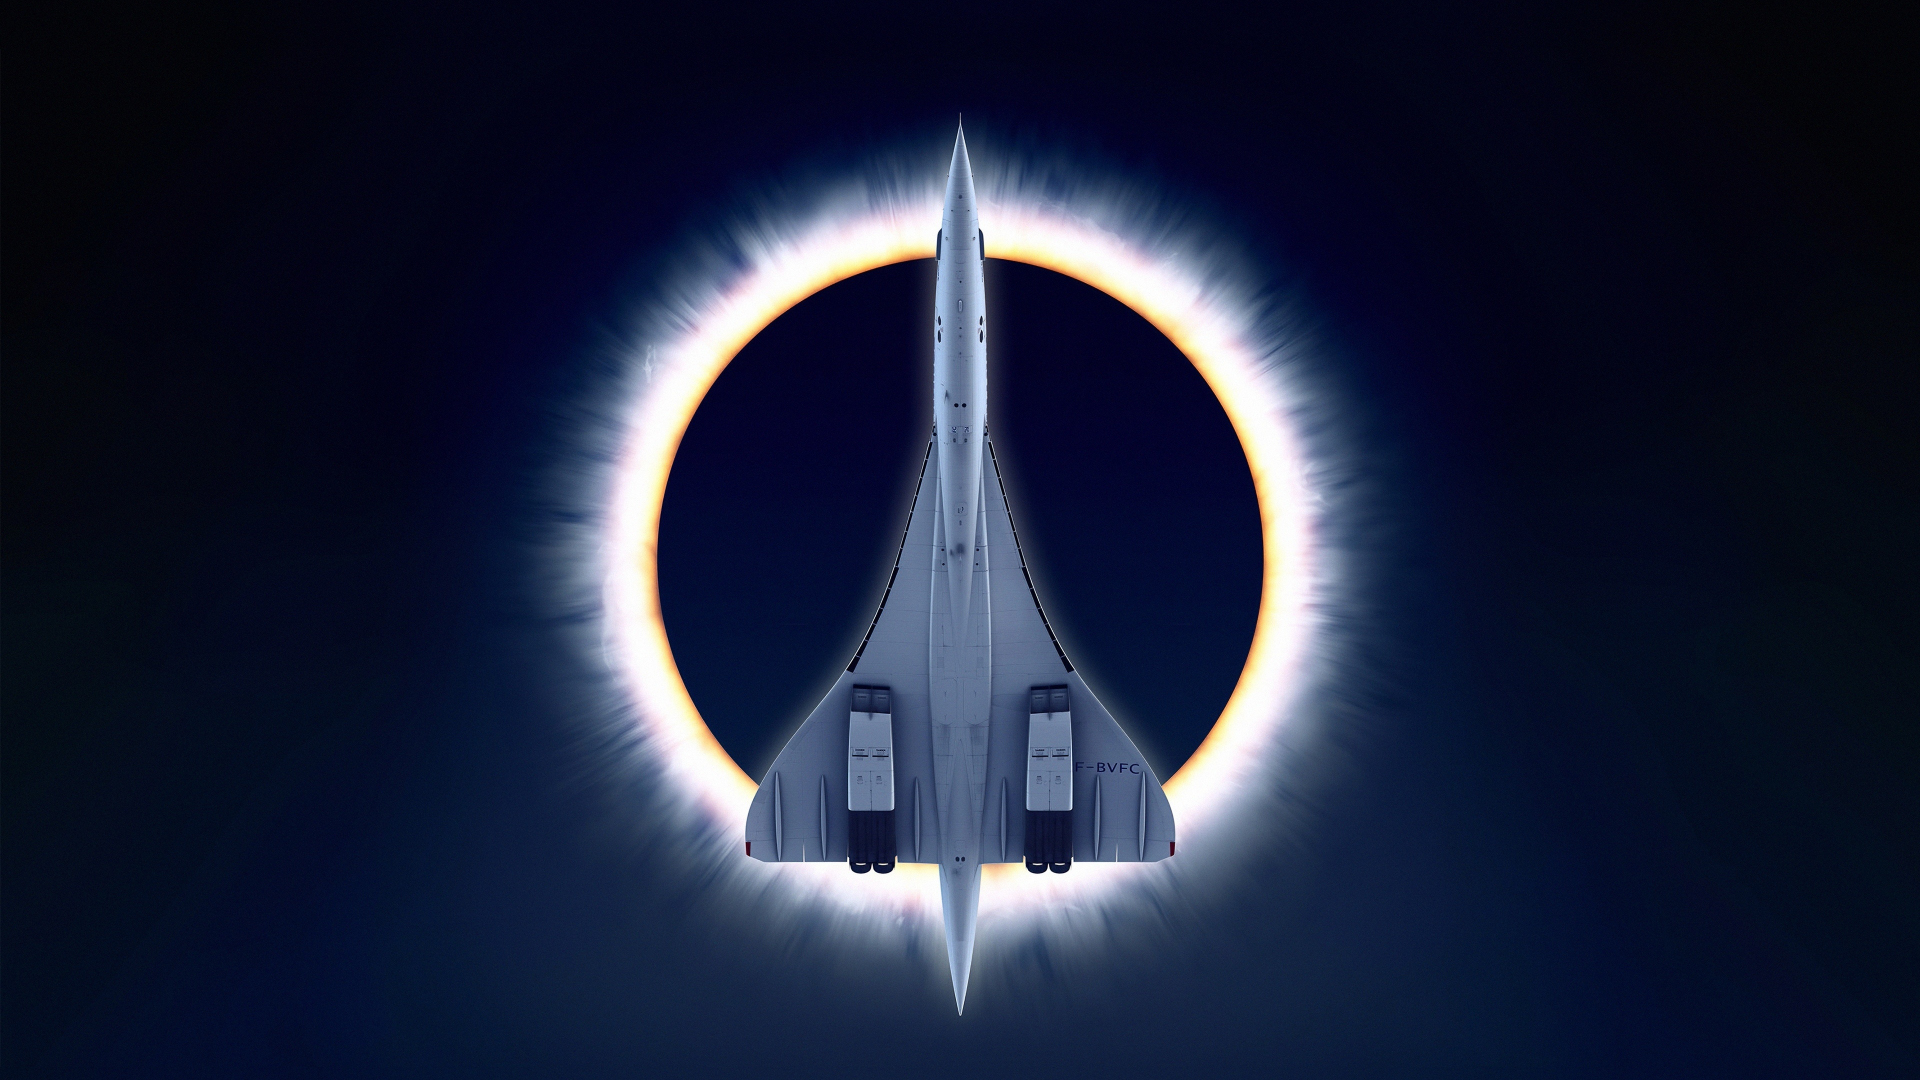 Concorde Carre, eclipse, airplane, moon, aircraft, 1920x1080 wallpaper